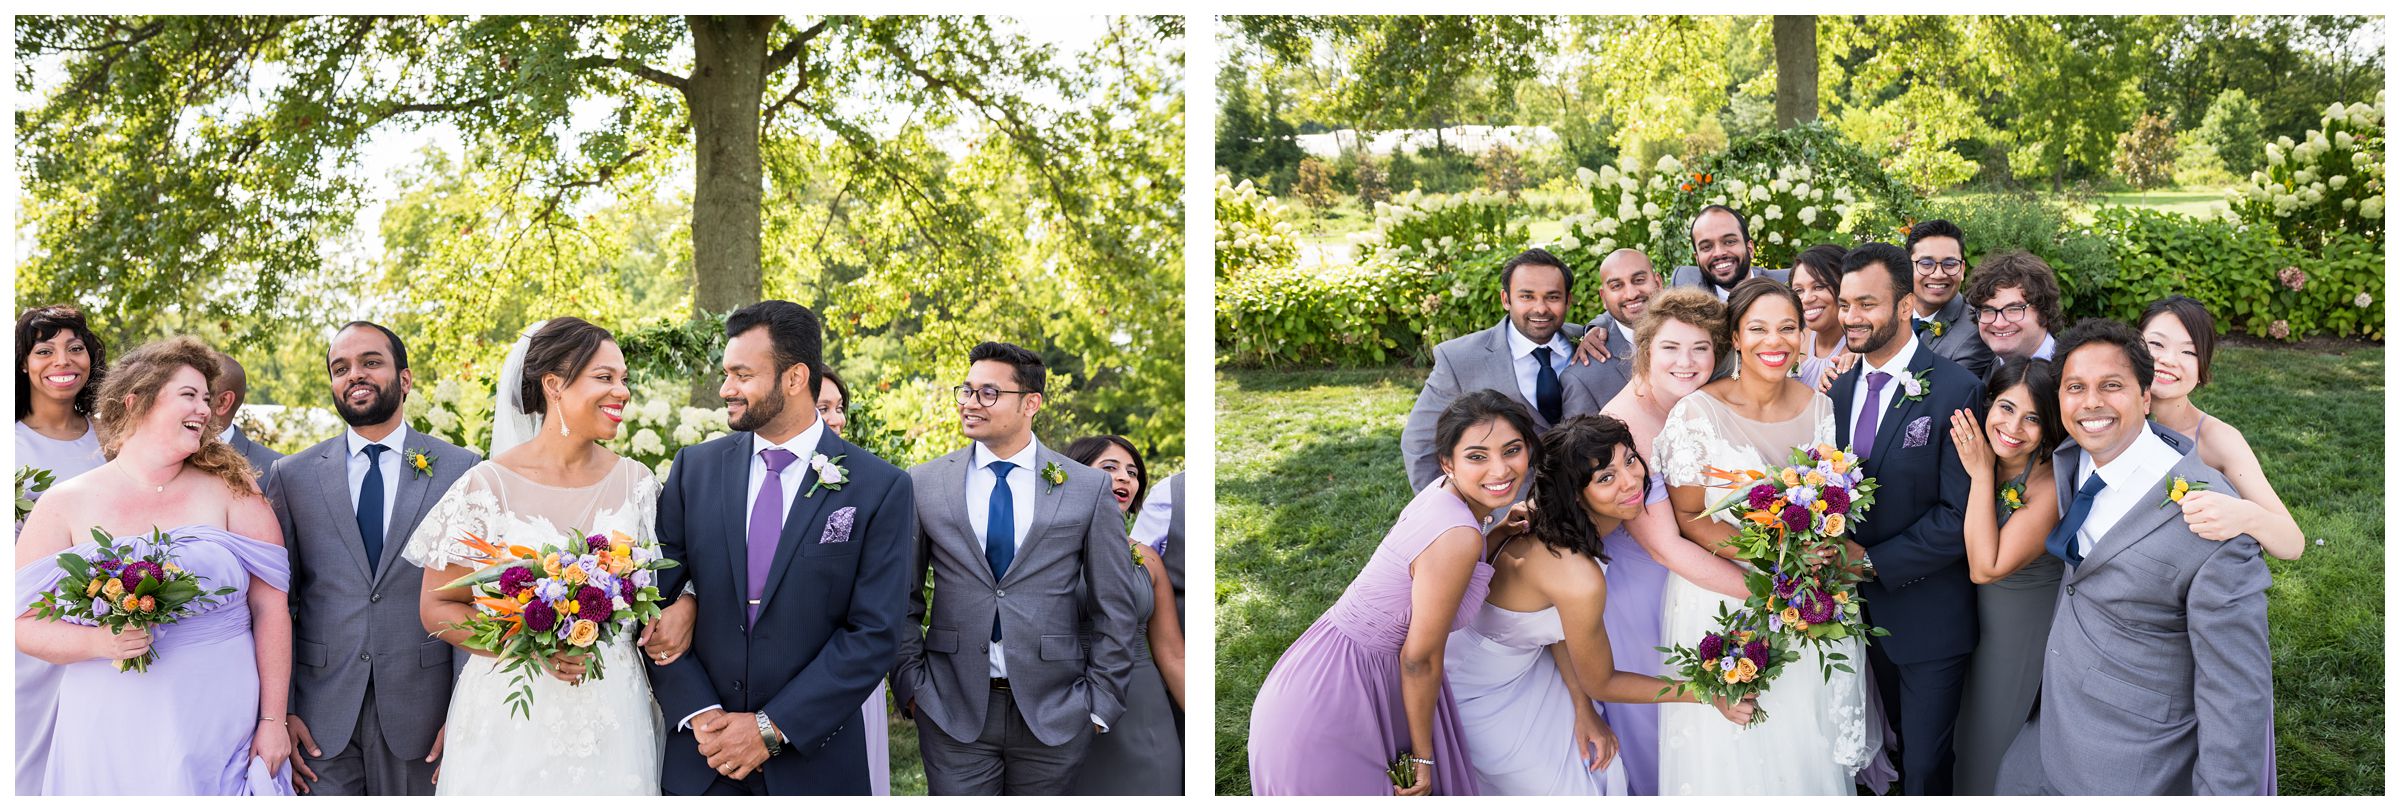 Indian and African American co-ed mixed gender wedding party at Jorgensen Farms